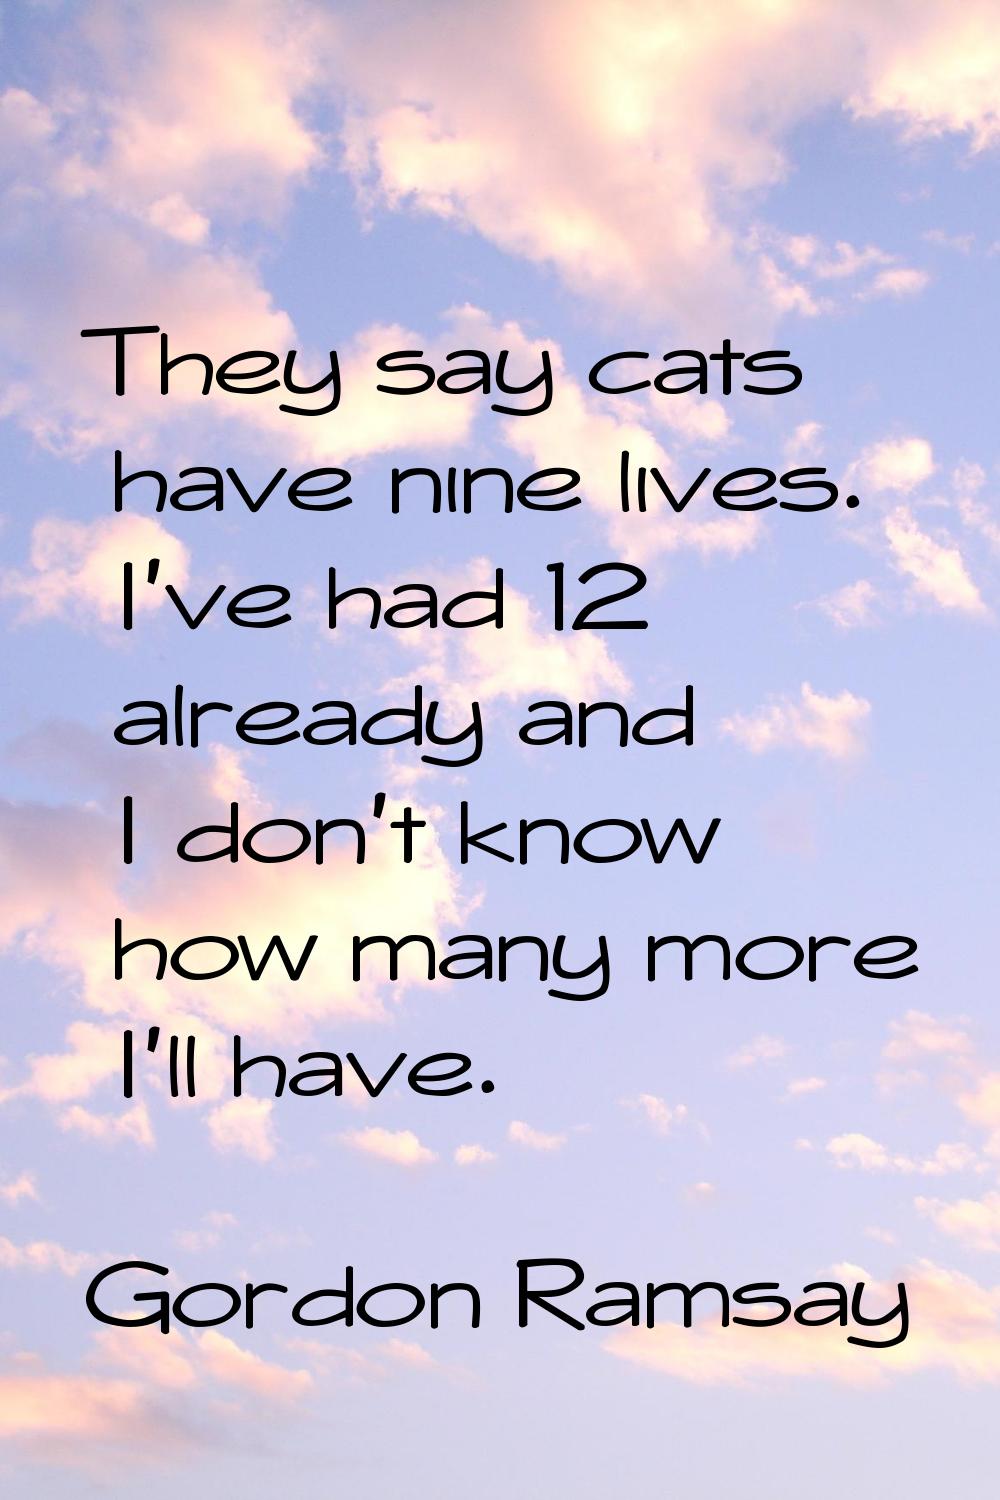 They say cats have nine lives. I've had 12 already and I don't know how many more I'll have.